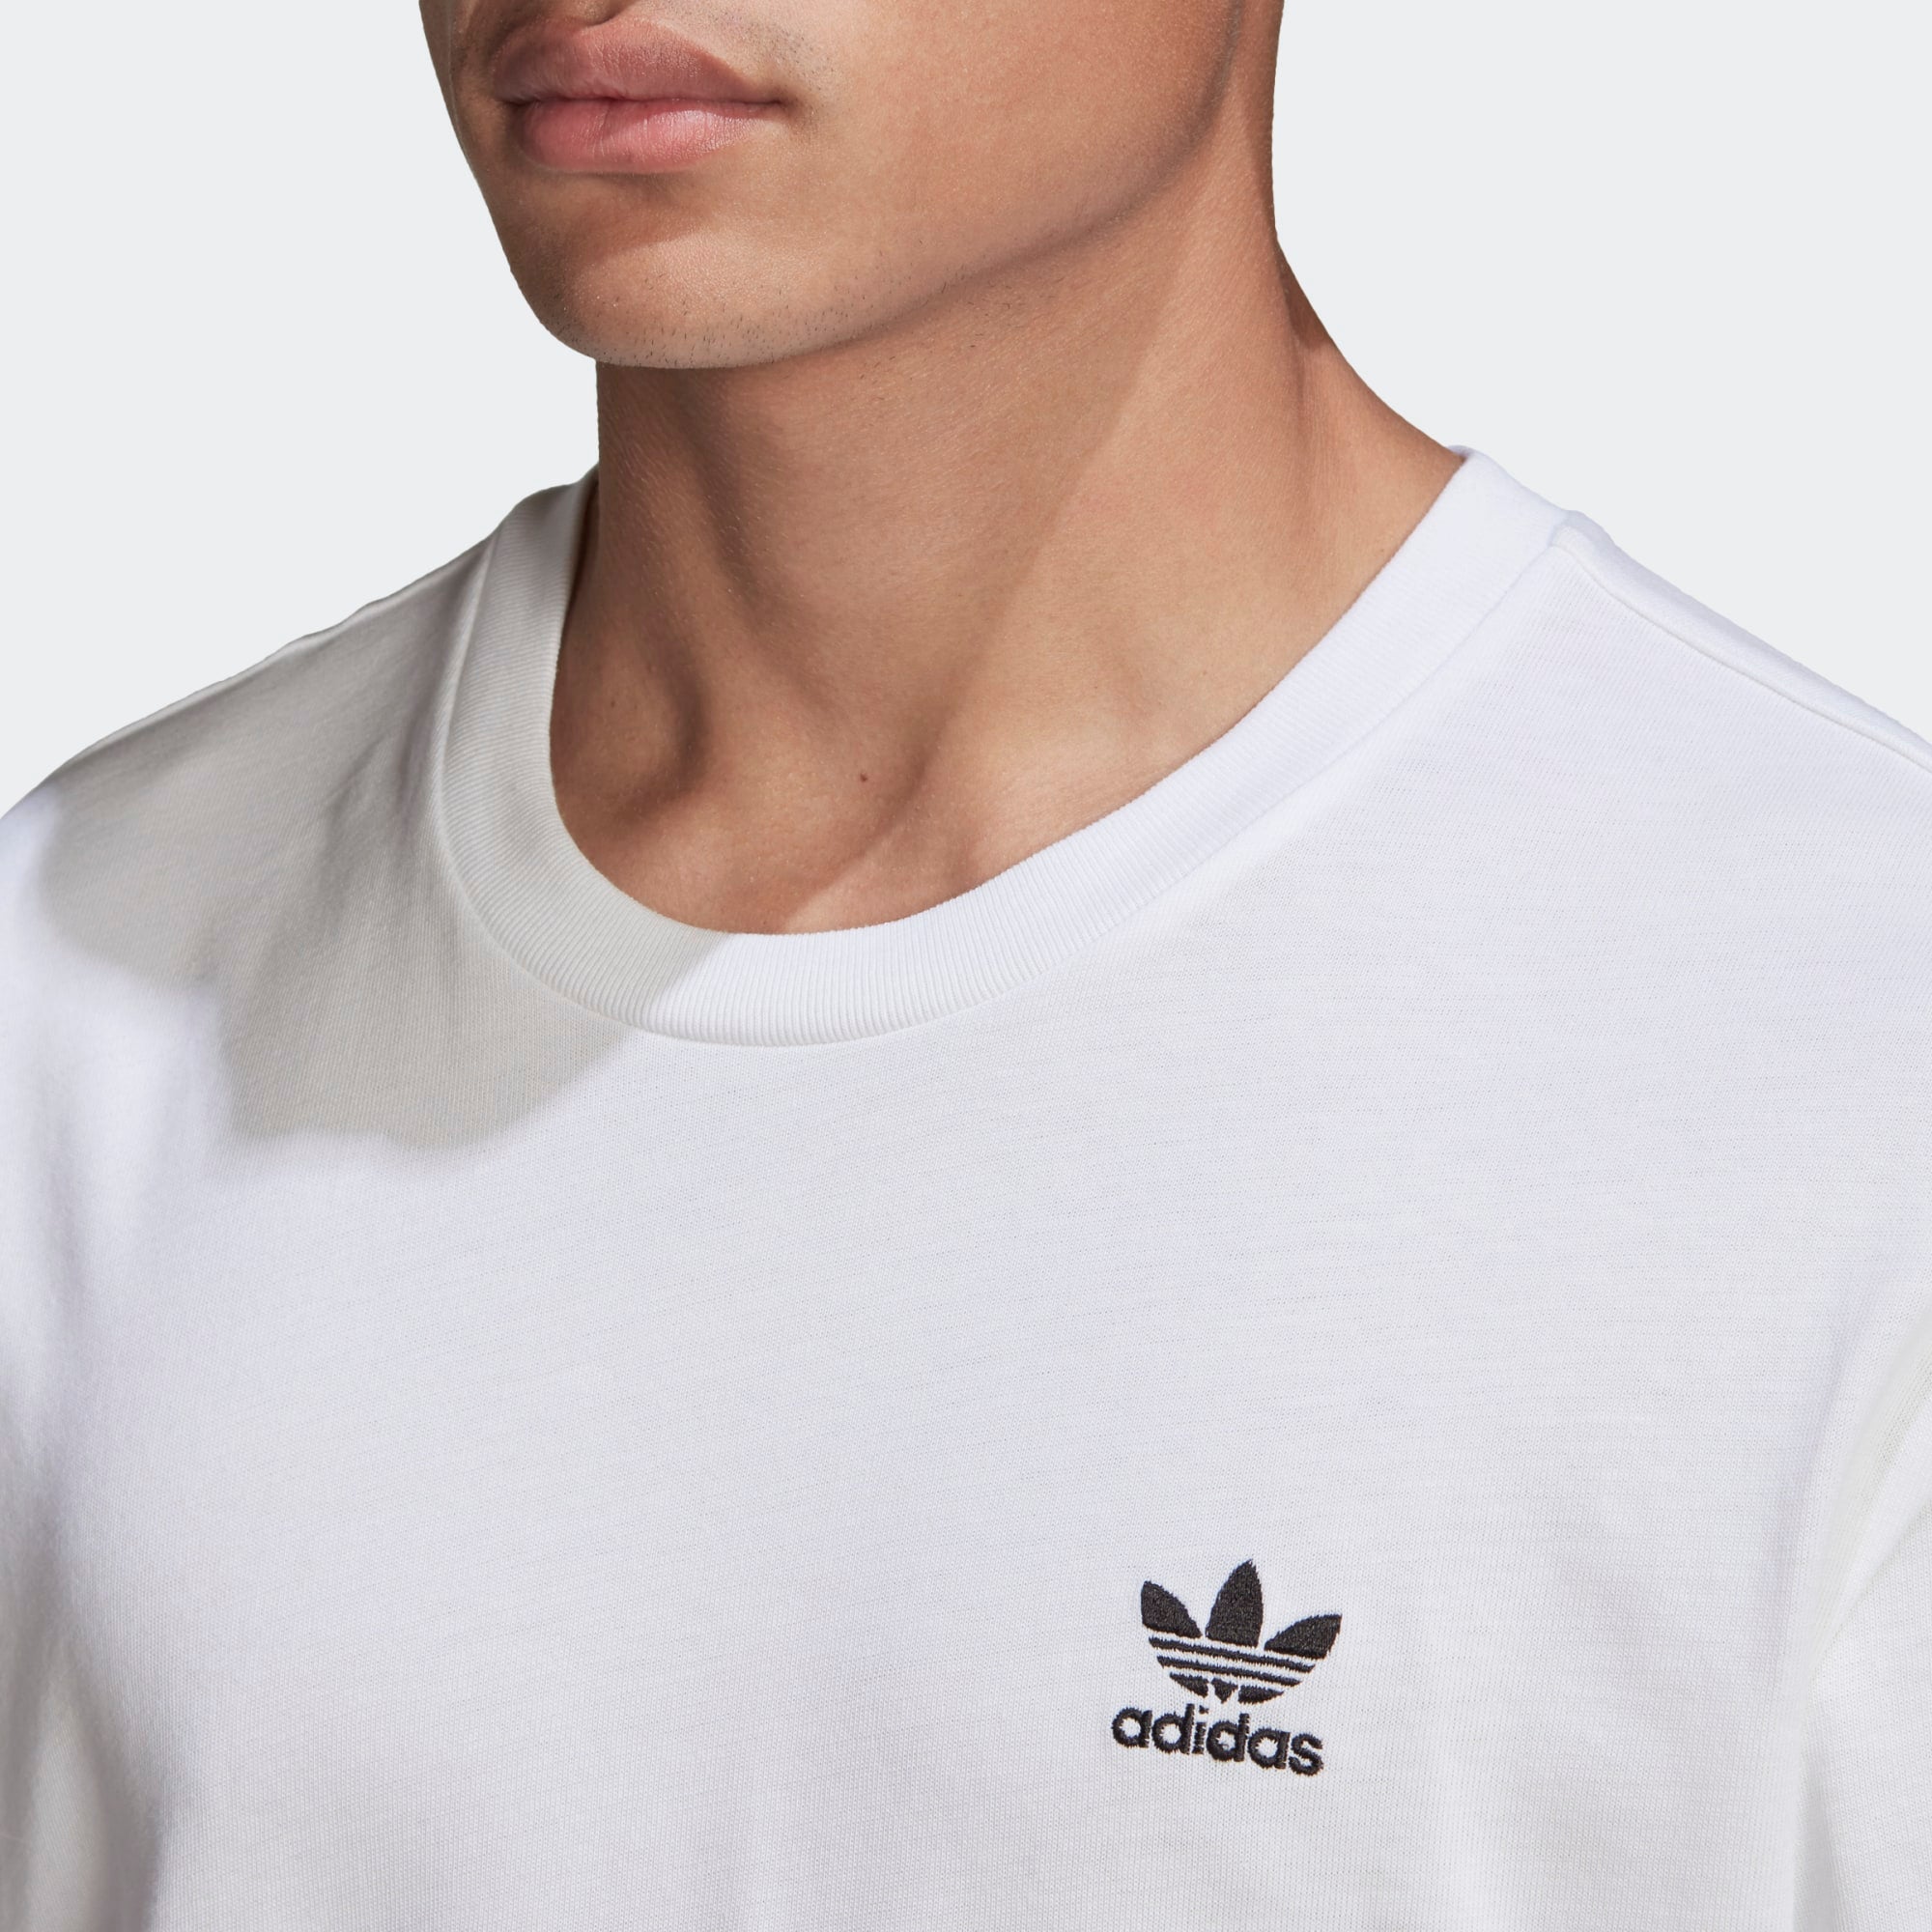 Tee Trilogy Boxy (White)(GN3453) – PH Embroidered Classics Adidas Merch Adicolor Logo